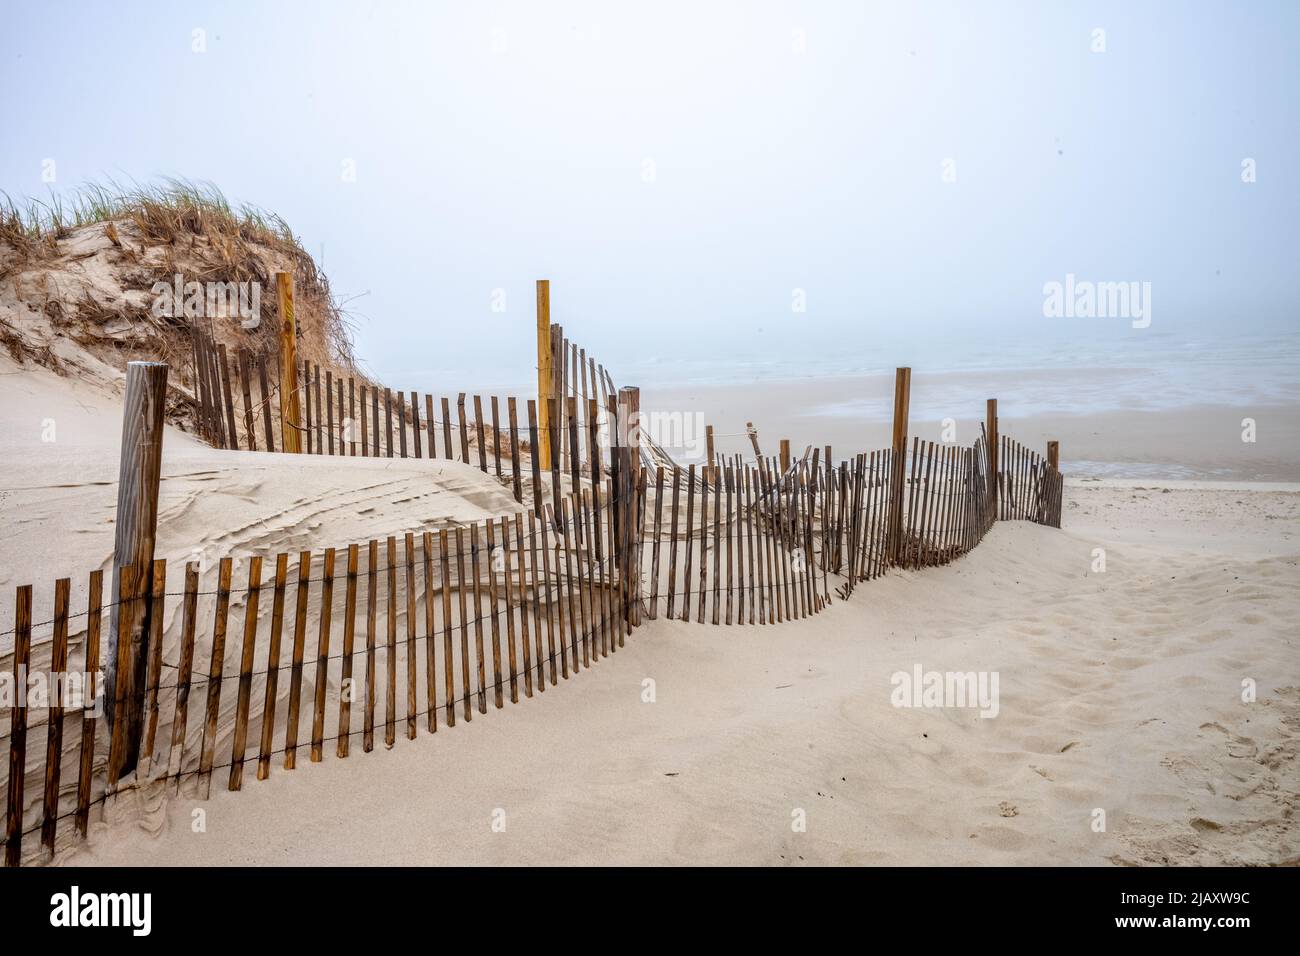 There is always one morning a month that starts off with a heavy fog. But that is the nice morning that you can walk on the beach alone and enjoy it. Stock Photo